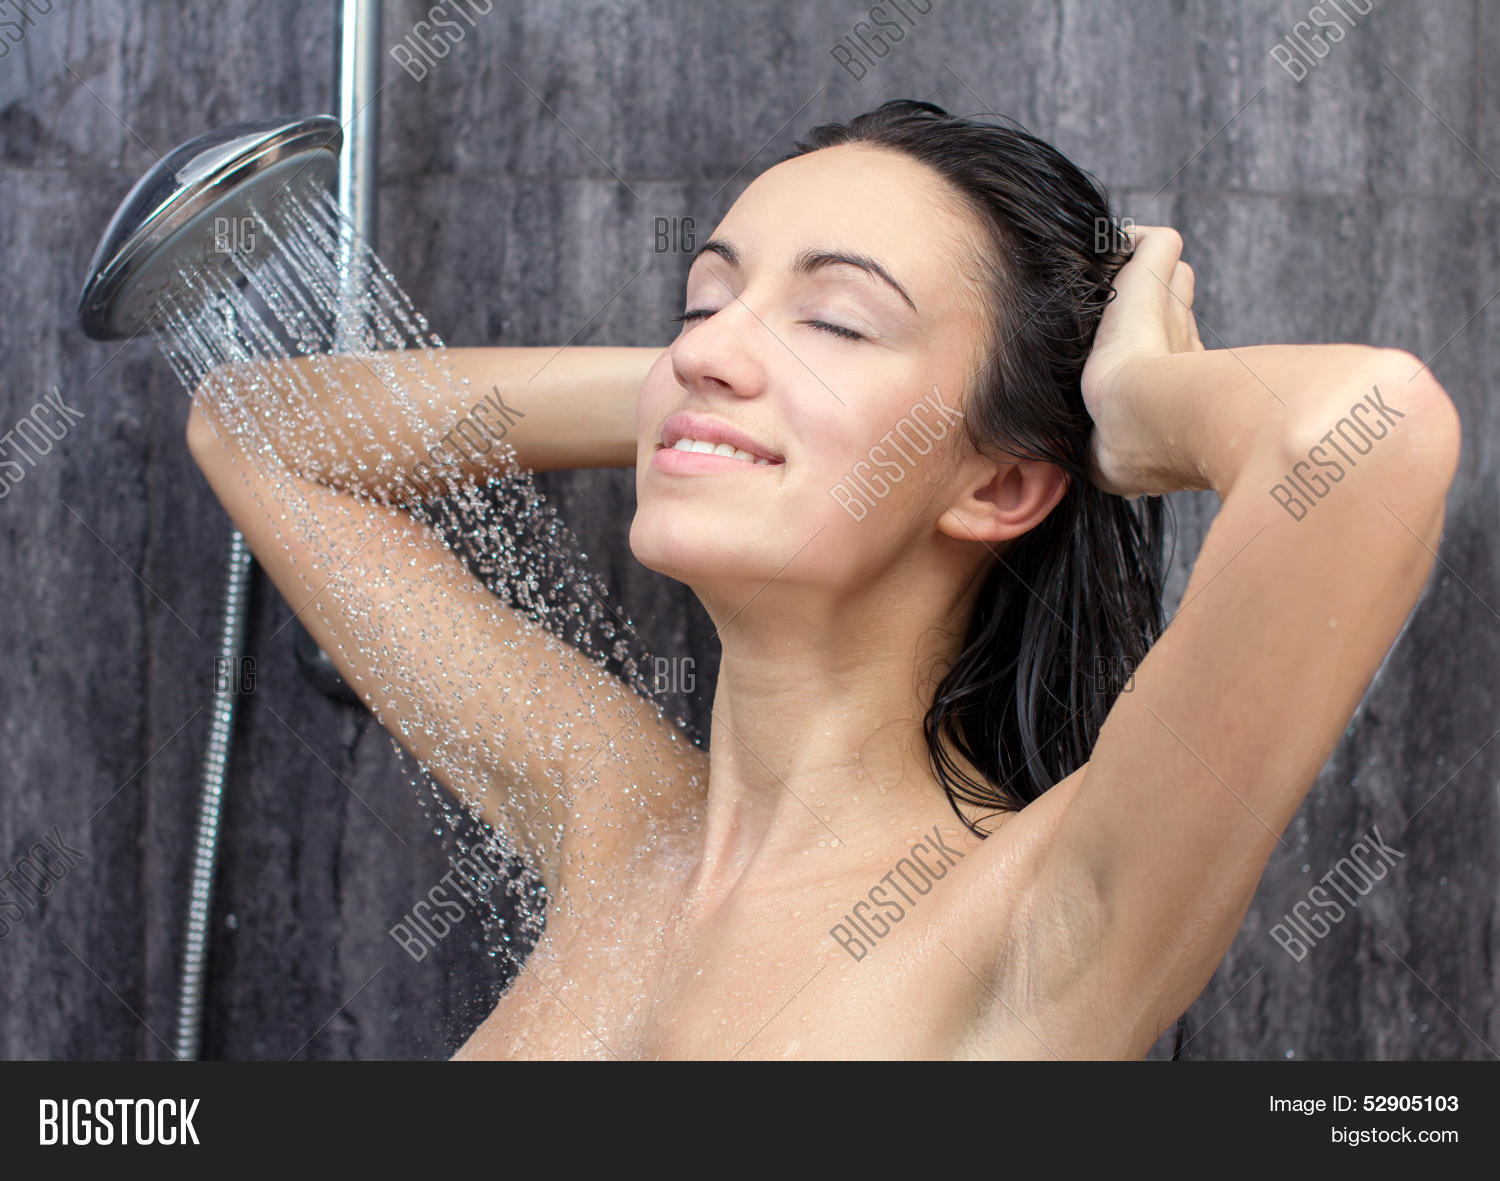 angel marie robbins recommends female taking a shower pic